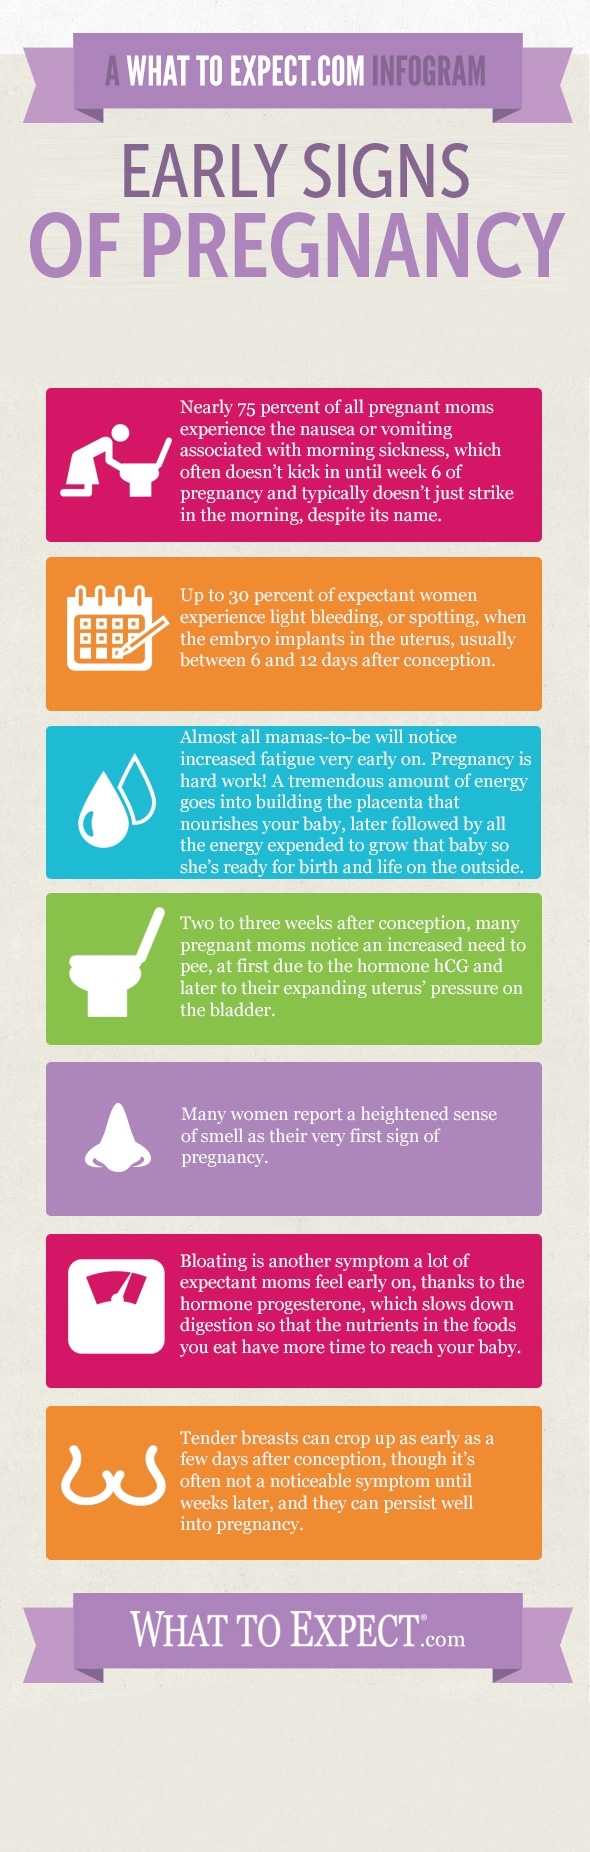 Infographic: Early Signs And Symptoms Of Pregnancy | What To Expect intended for How Soon Do Pregnancy Symptoms Start